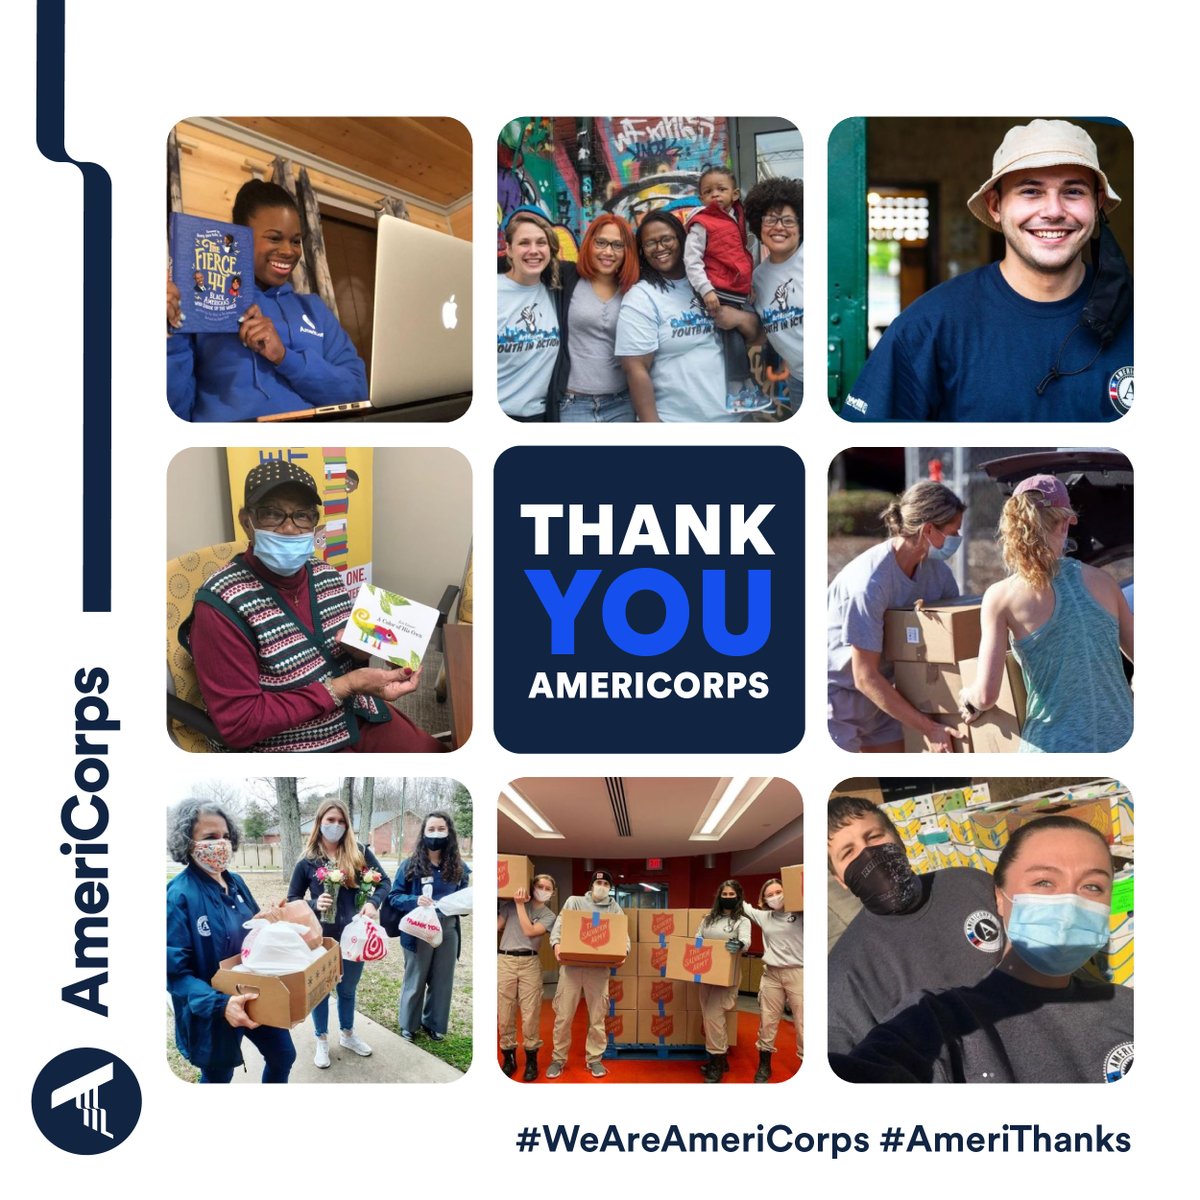 As #AmeriCorpsWeek wraps up, we'd like to thank all the dedicated @AmeriCorps members currently serving or who have previously served. Your dedication has led to a brighter tomorrow. You inspire the next generation of service members. Many, many #AmeriThanks to you!